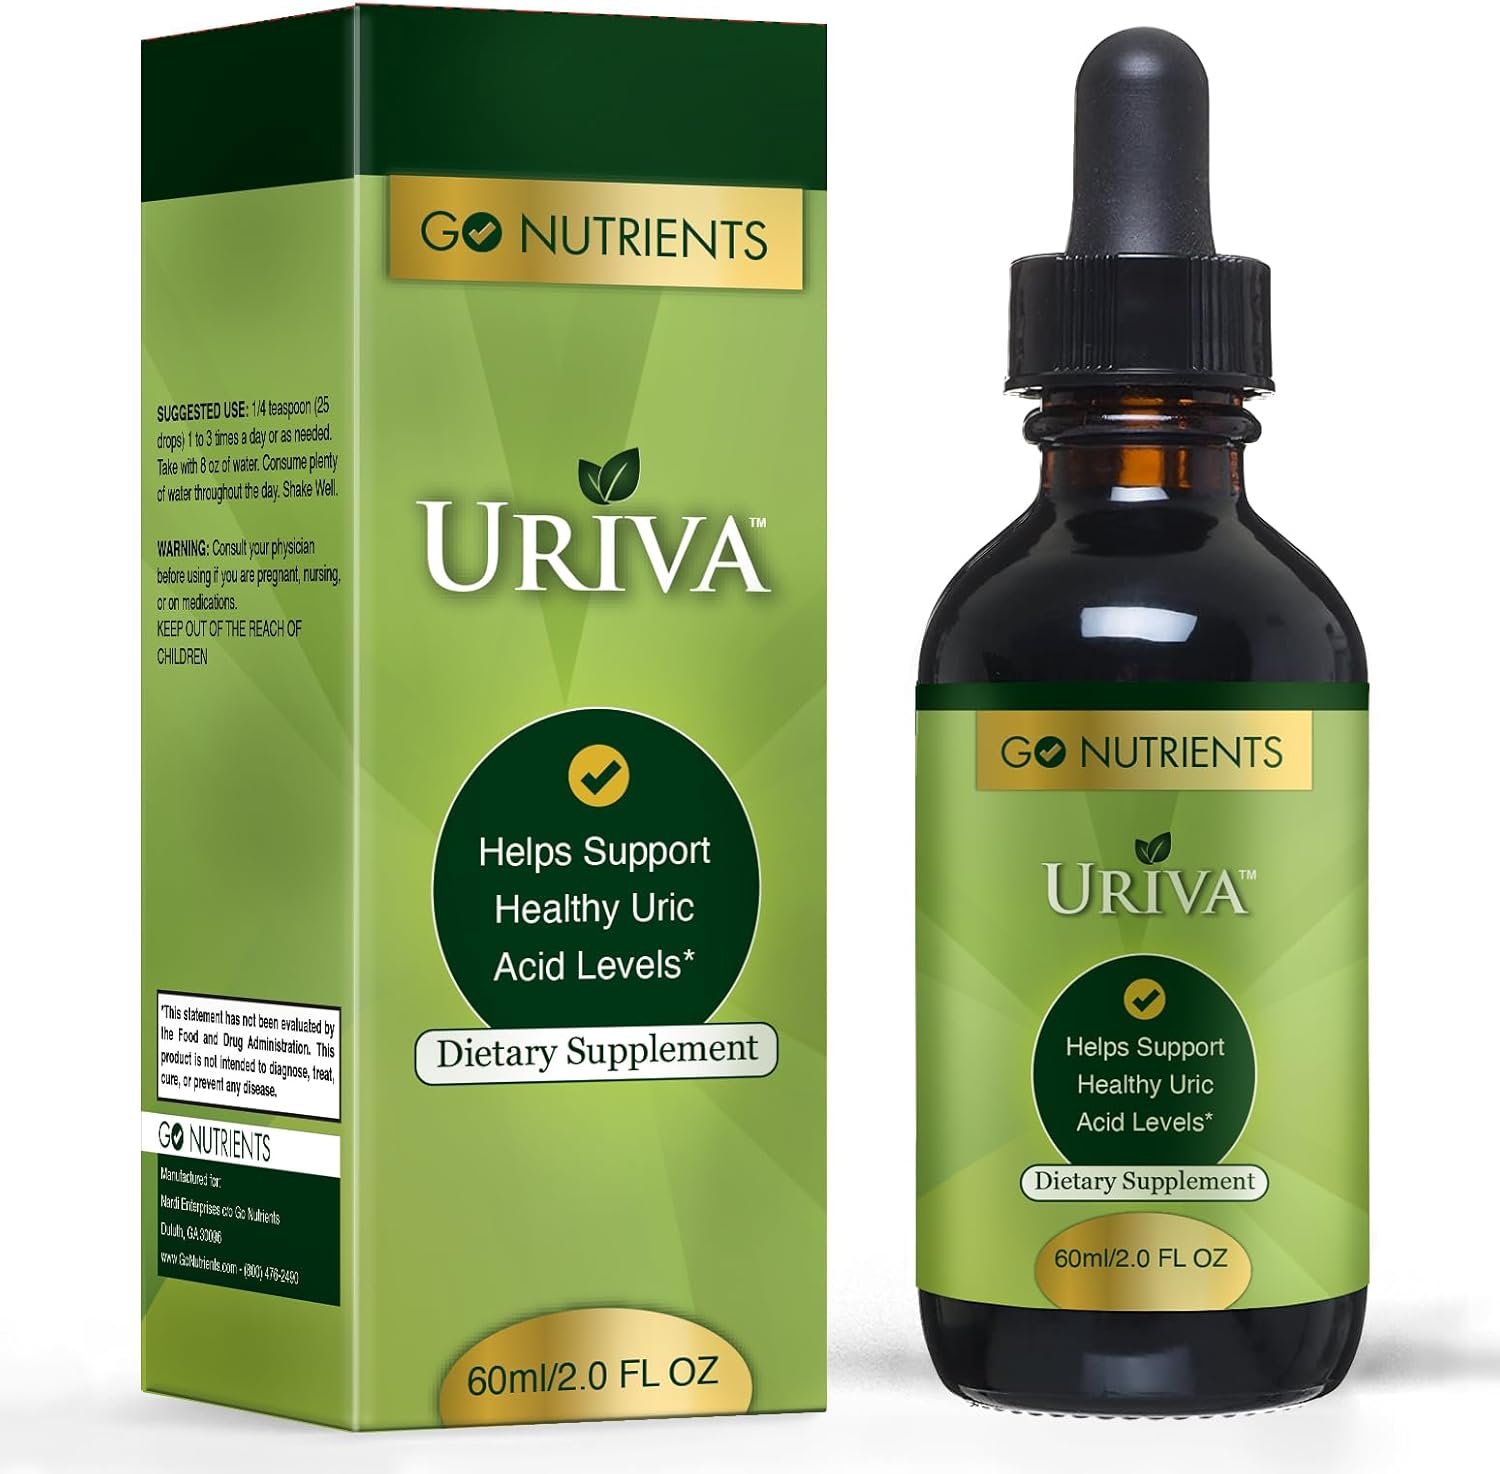 Go Nutrients Uriva Advanced Uric Acid Flush Cleanse review